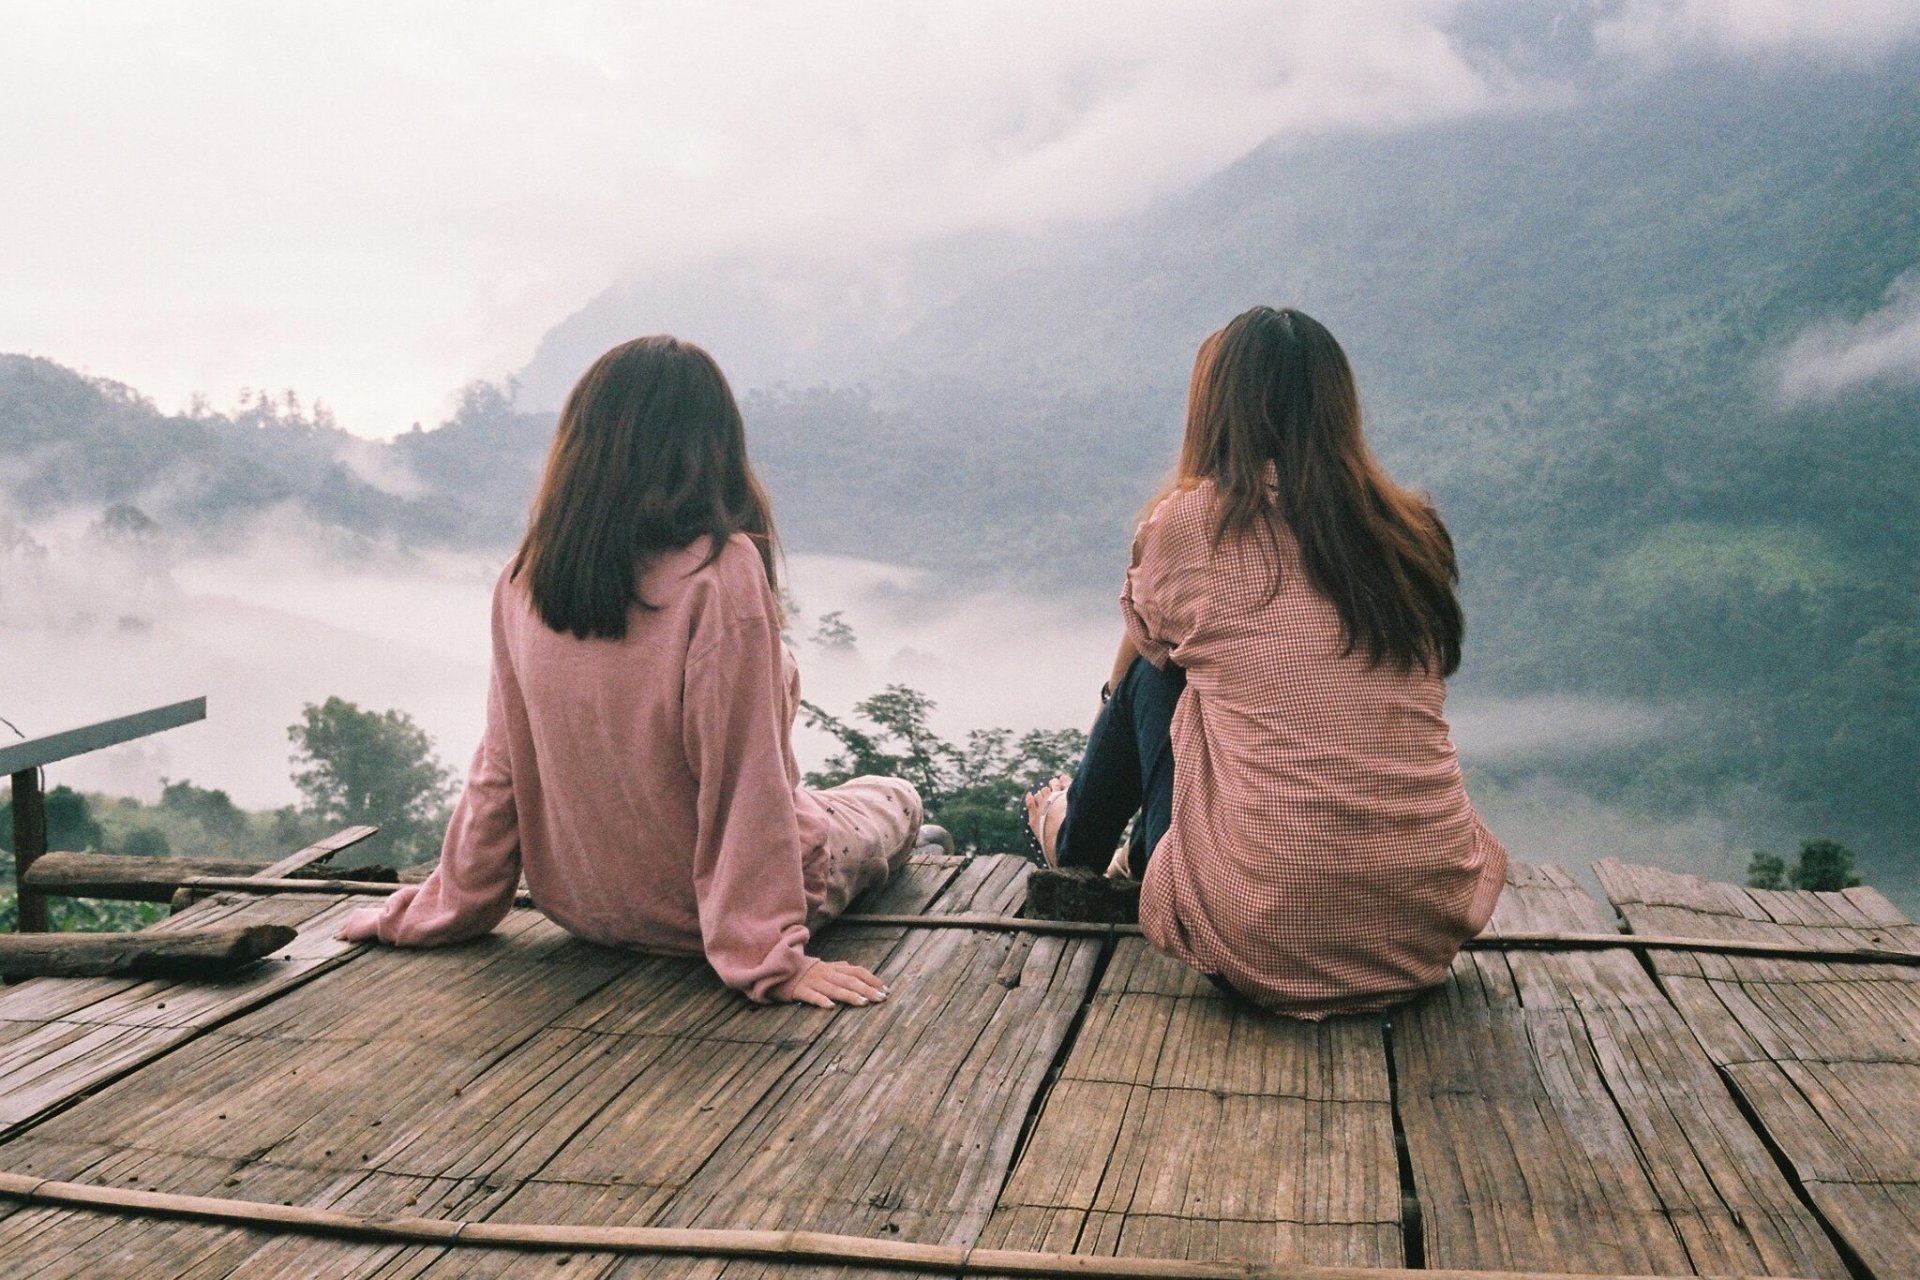 Two brunette girls in matching dusty rose pink shirts sitting on a rickety wooden platform overlooking misty mountains